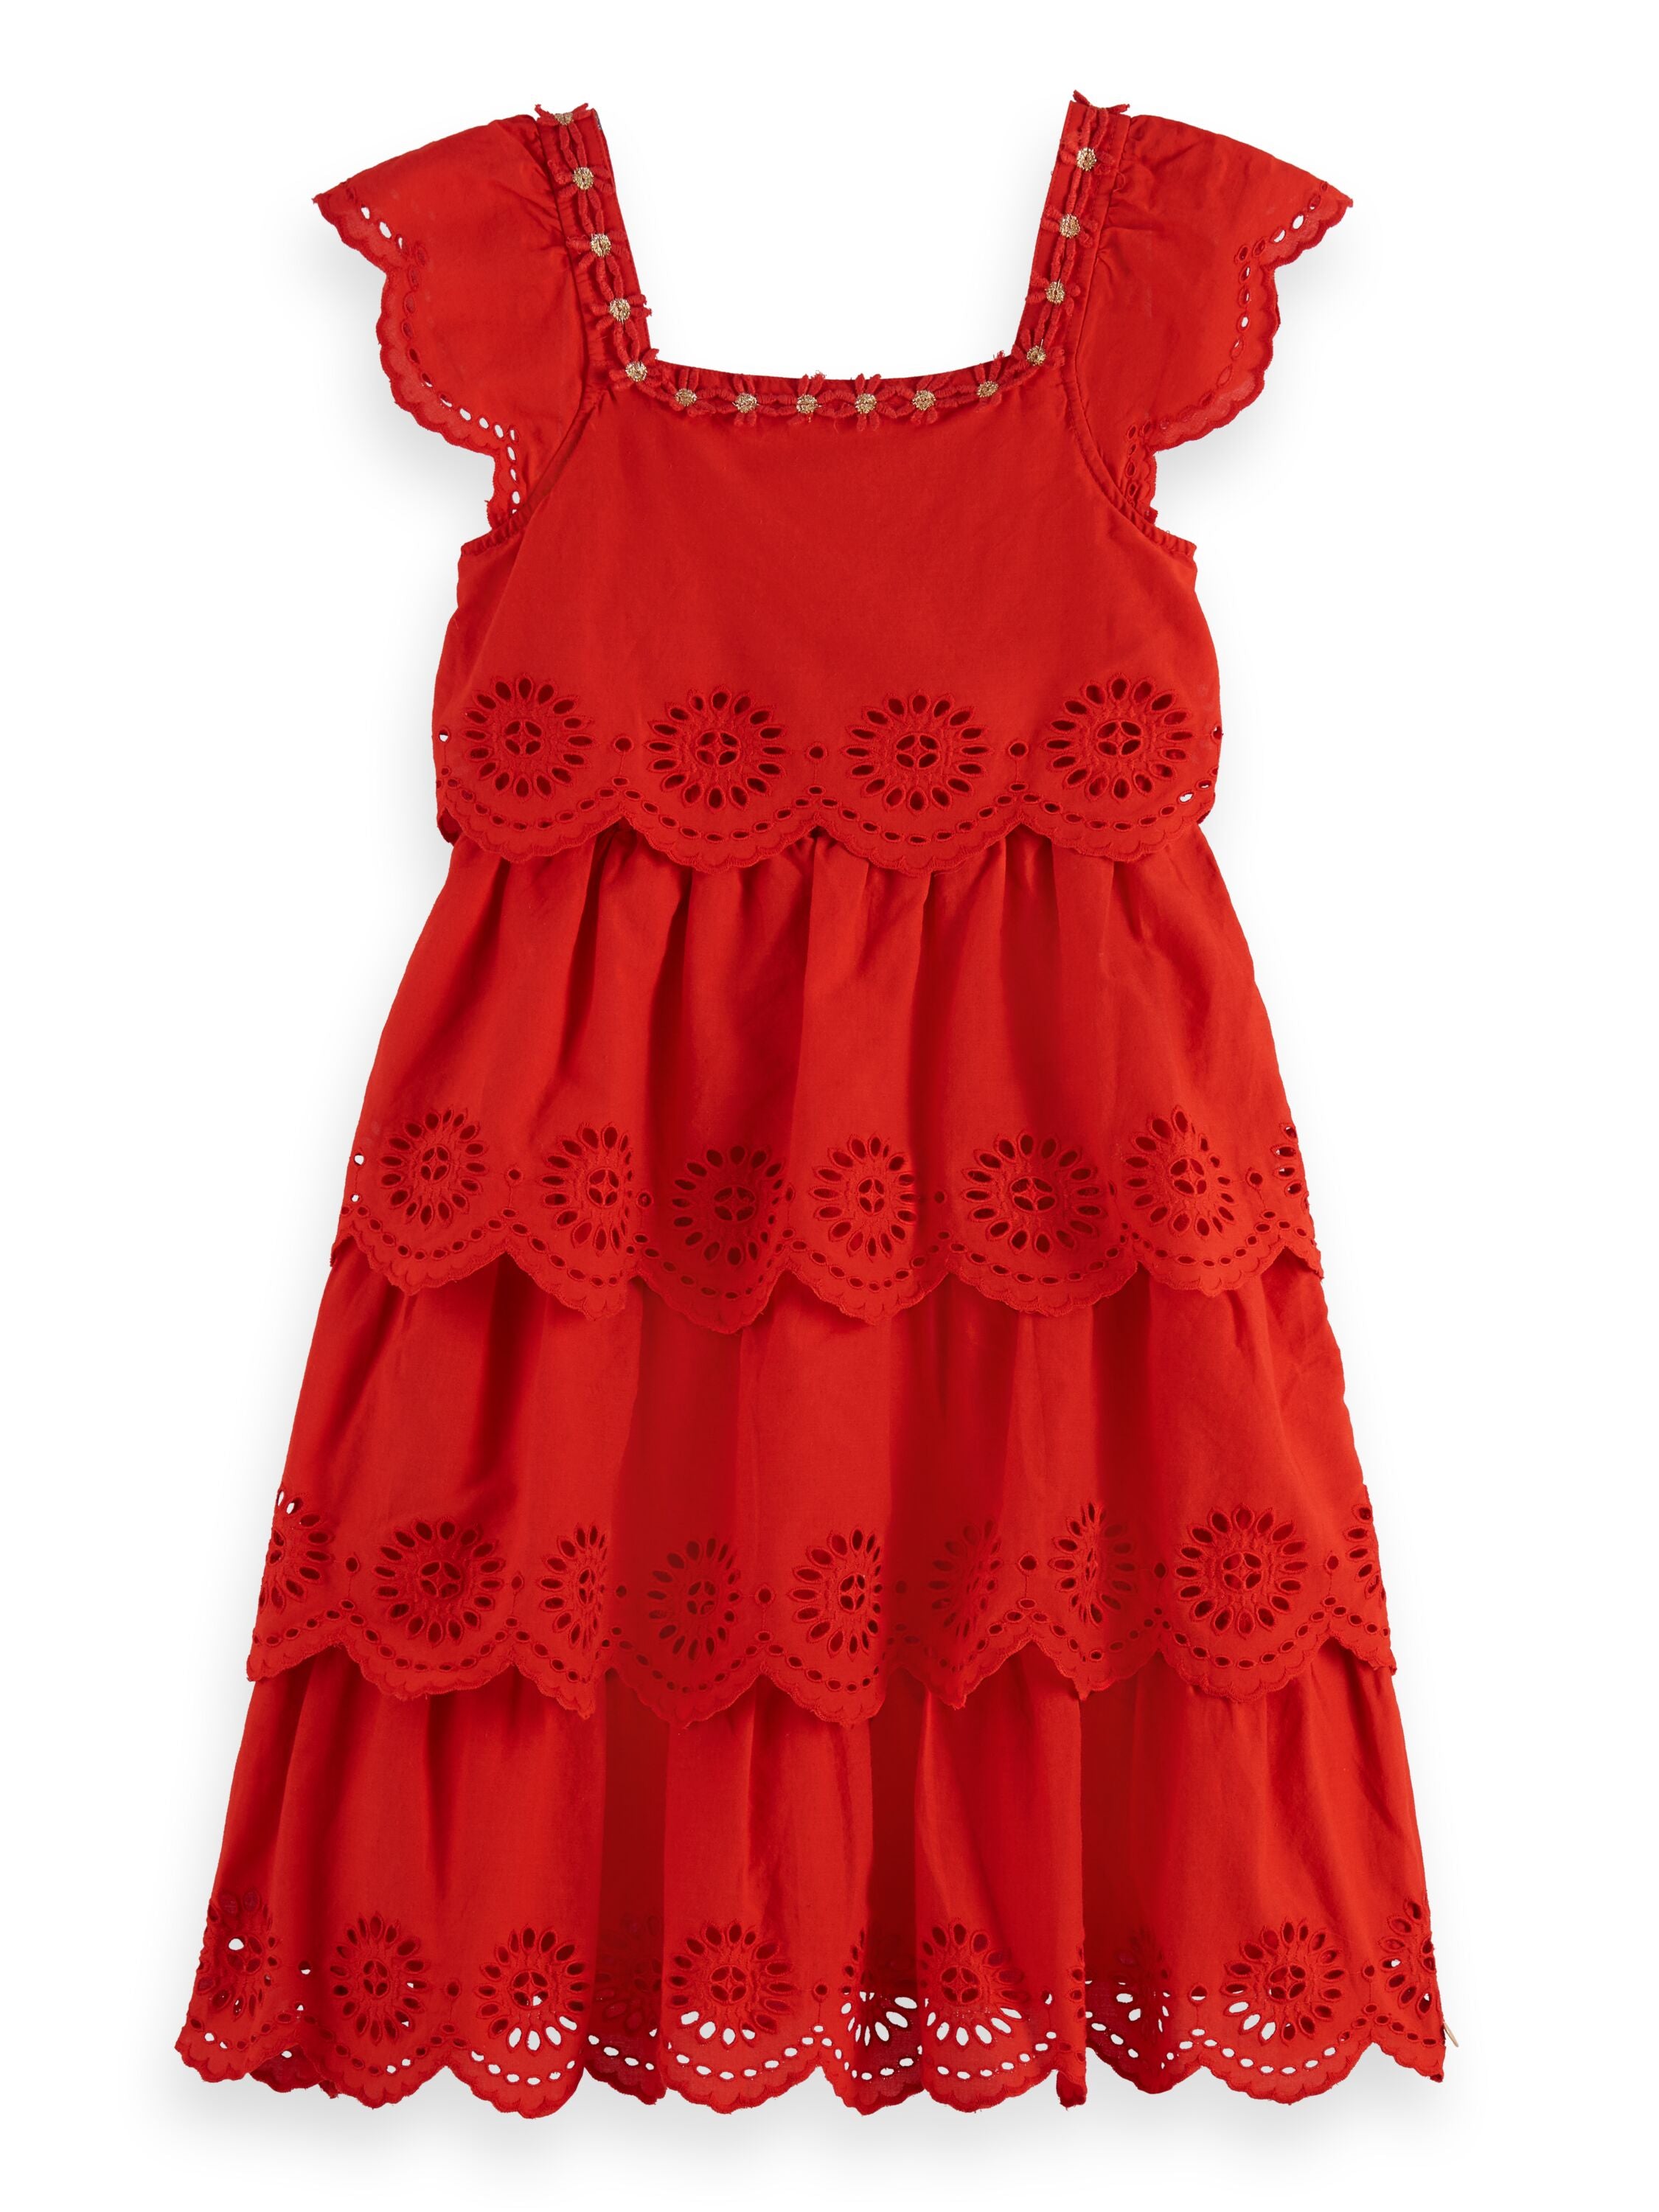 Scotch & Soda - Delicate Dress with English Embroidery